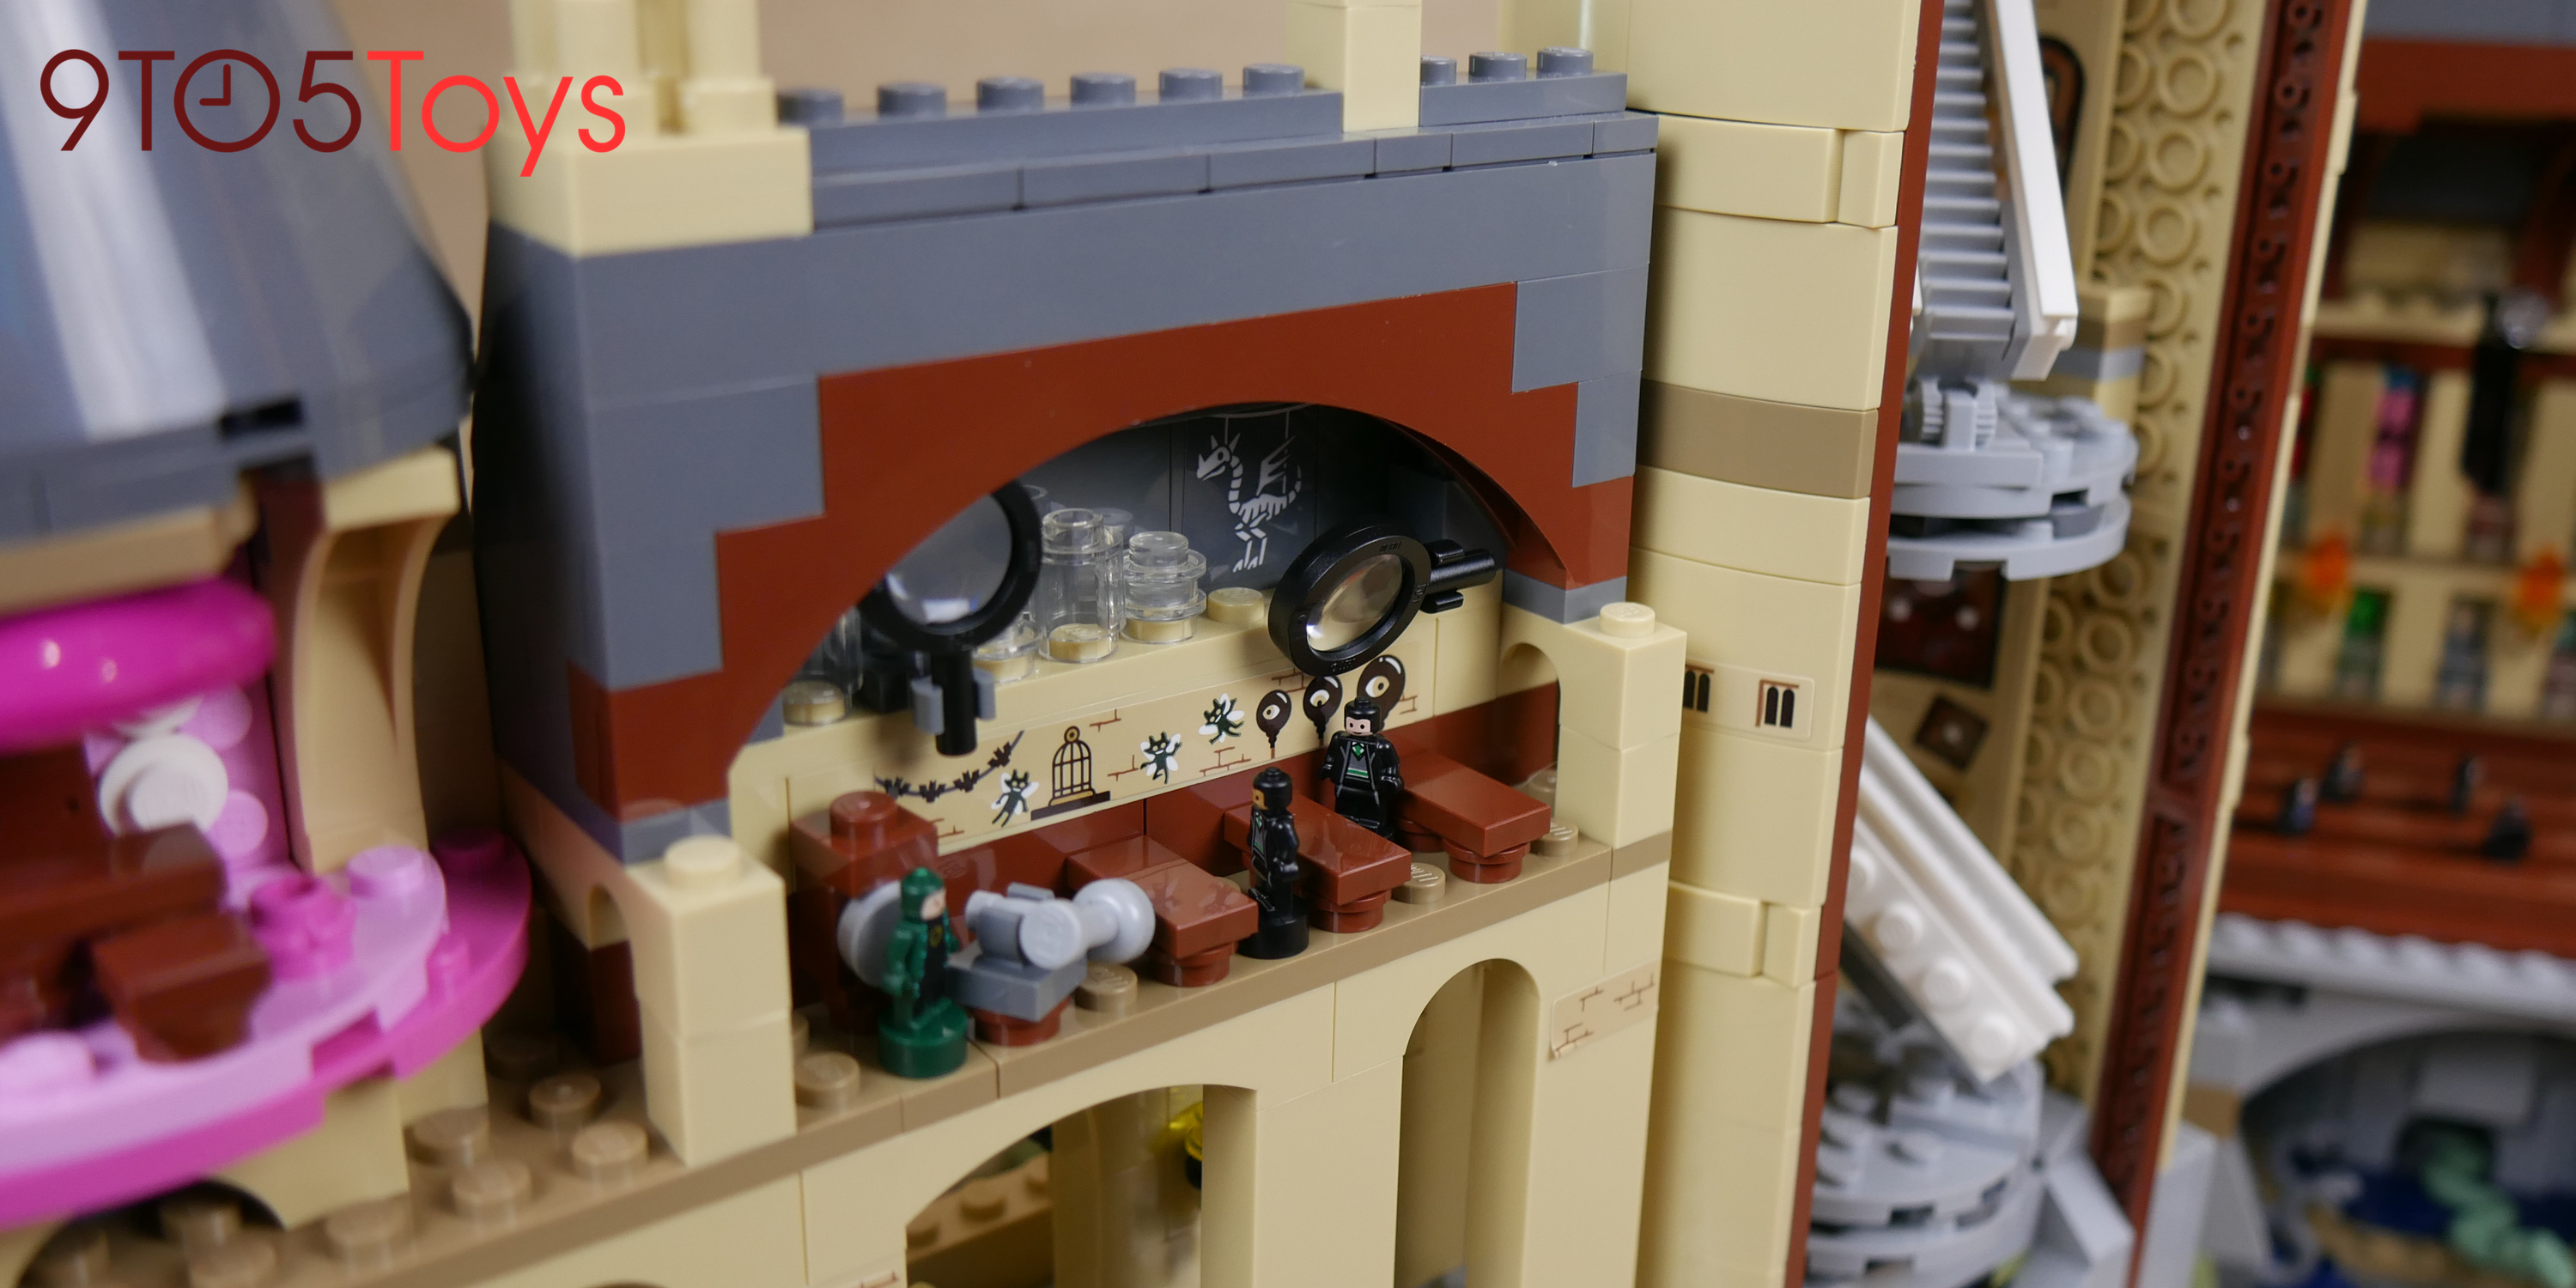 LEGO Harry Potter 71043 Hogwarts Castle, 2nd-largest LEGO set ever released  [Review] - The Brothers Brick